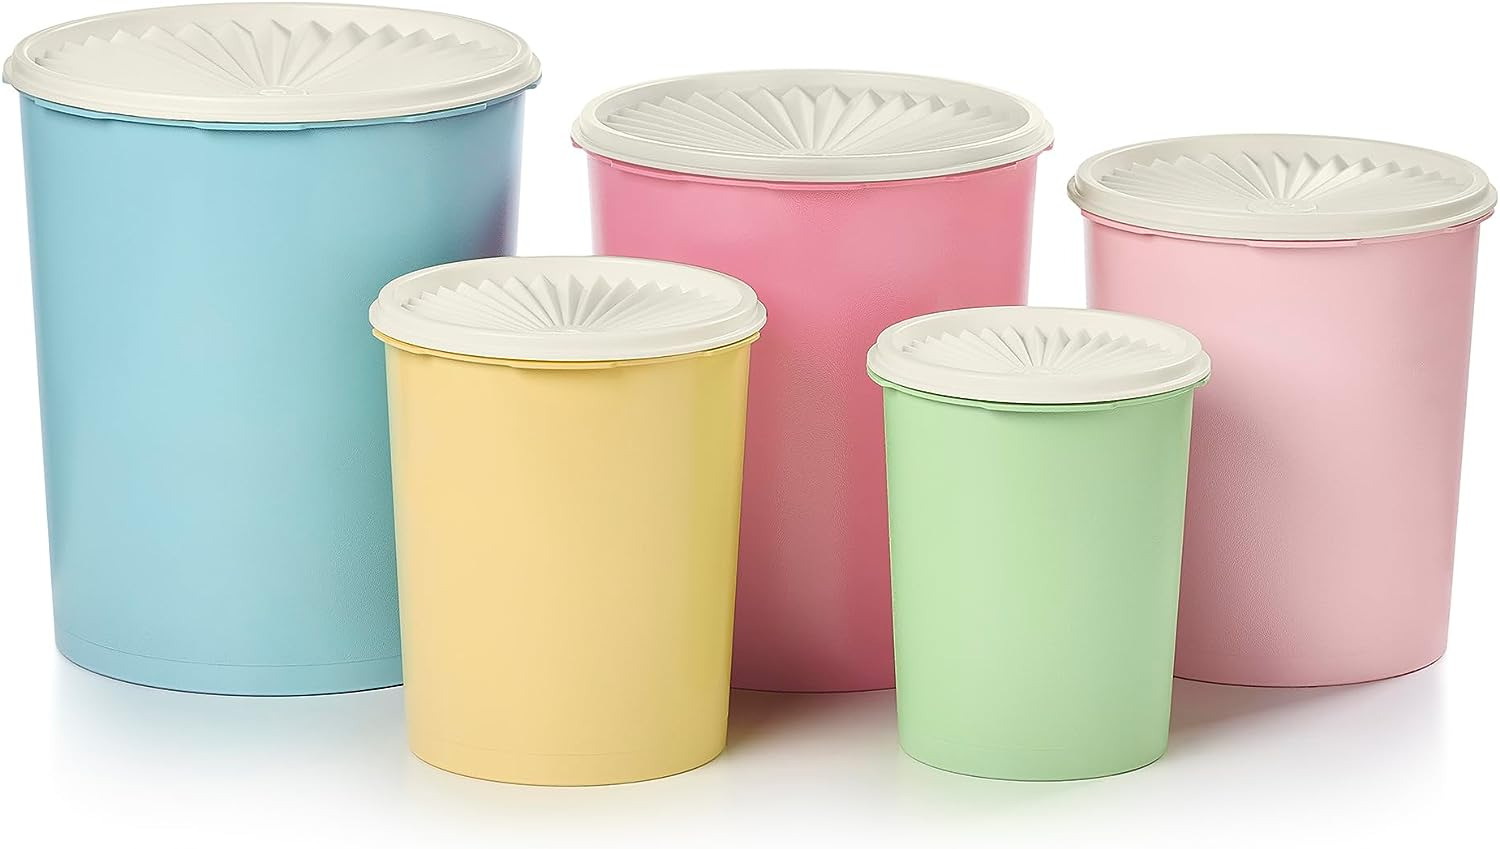 Heritage Collection 10 Piece Nested Canister Set in Vintage Colors - Dishwasher 